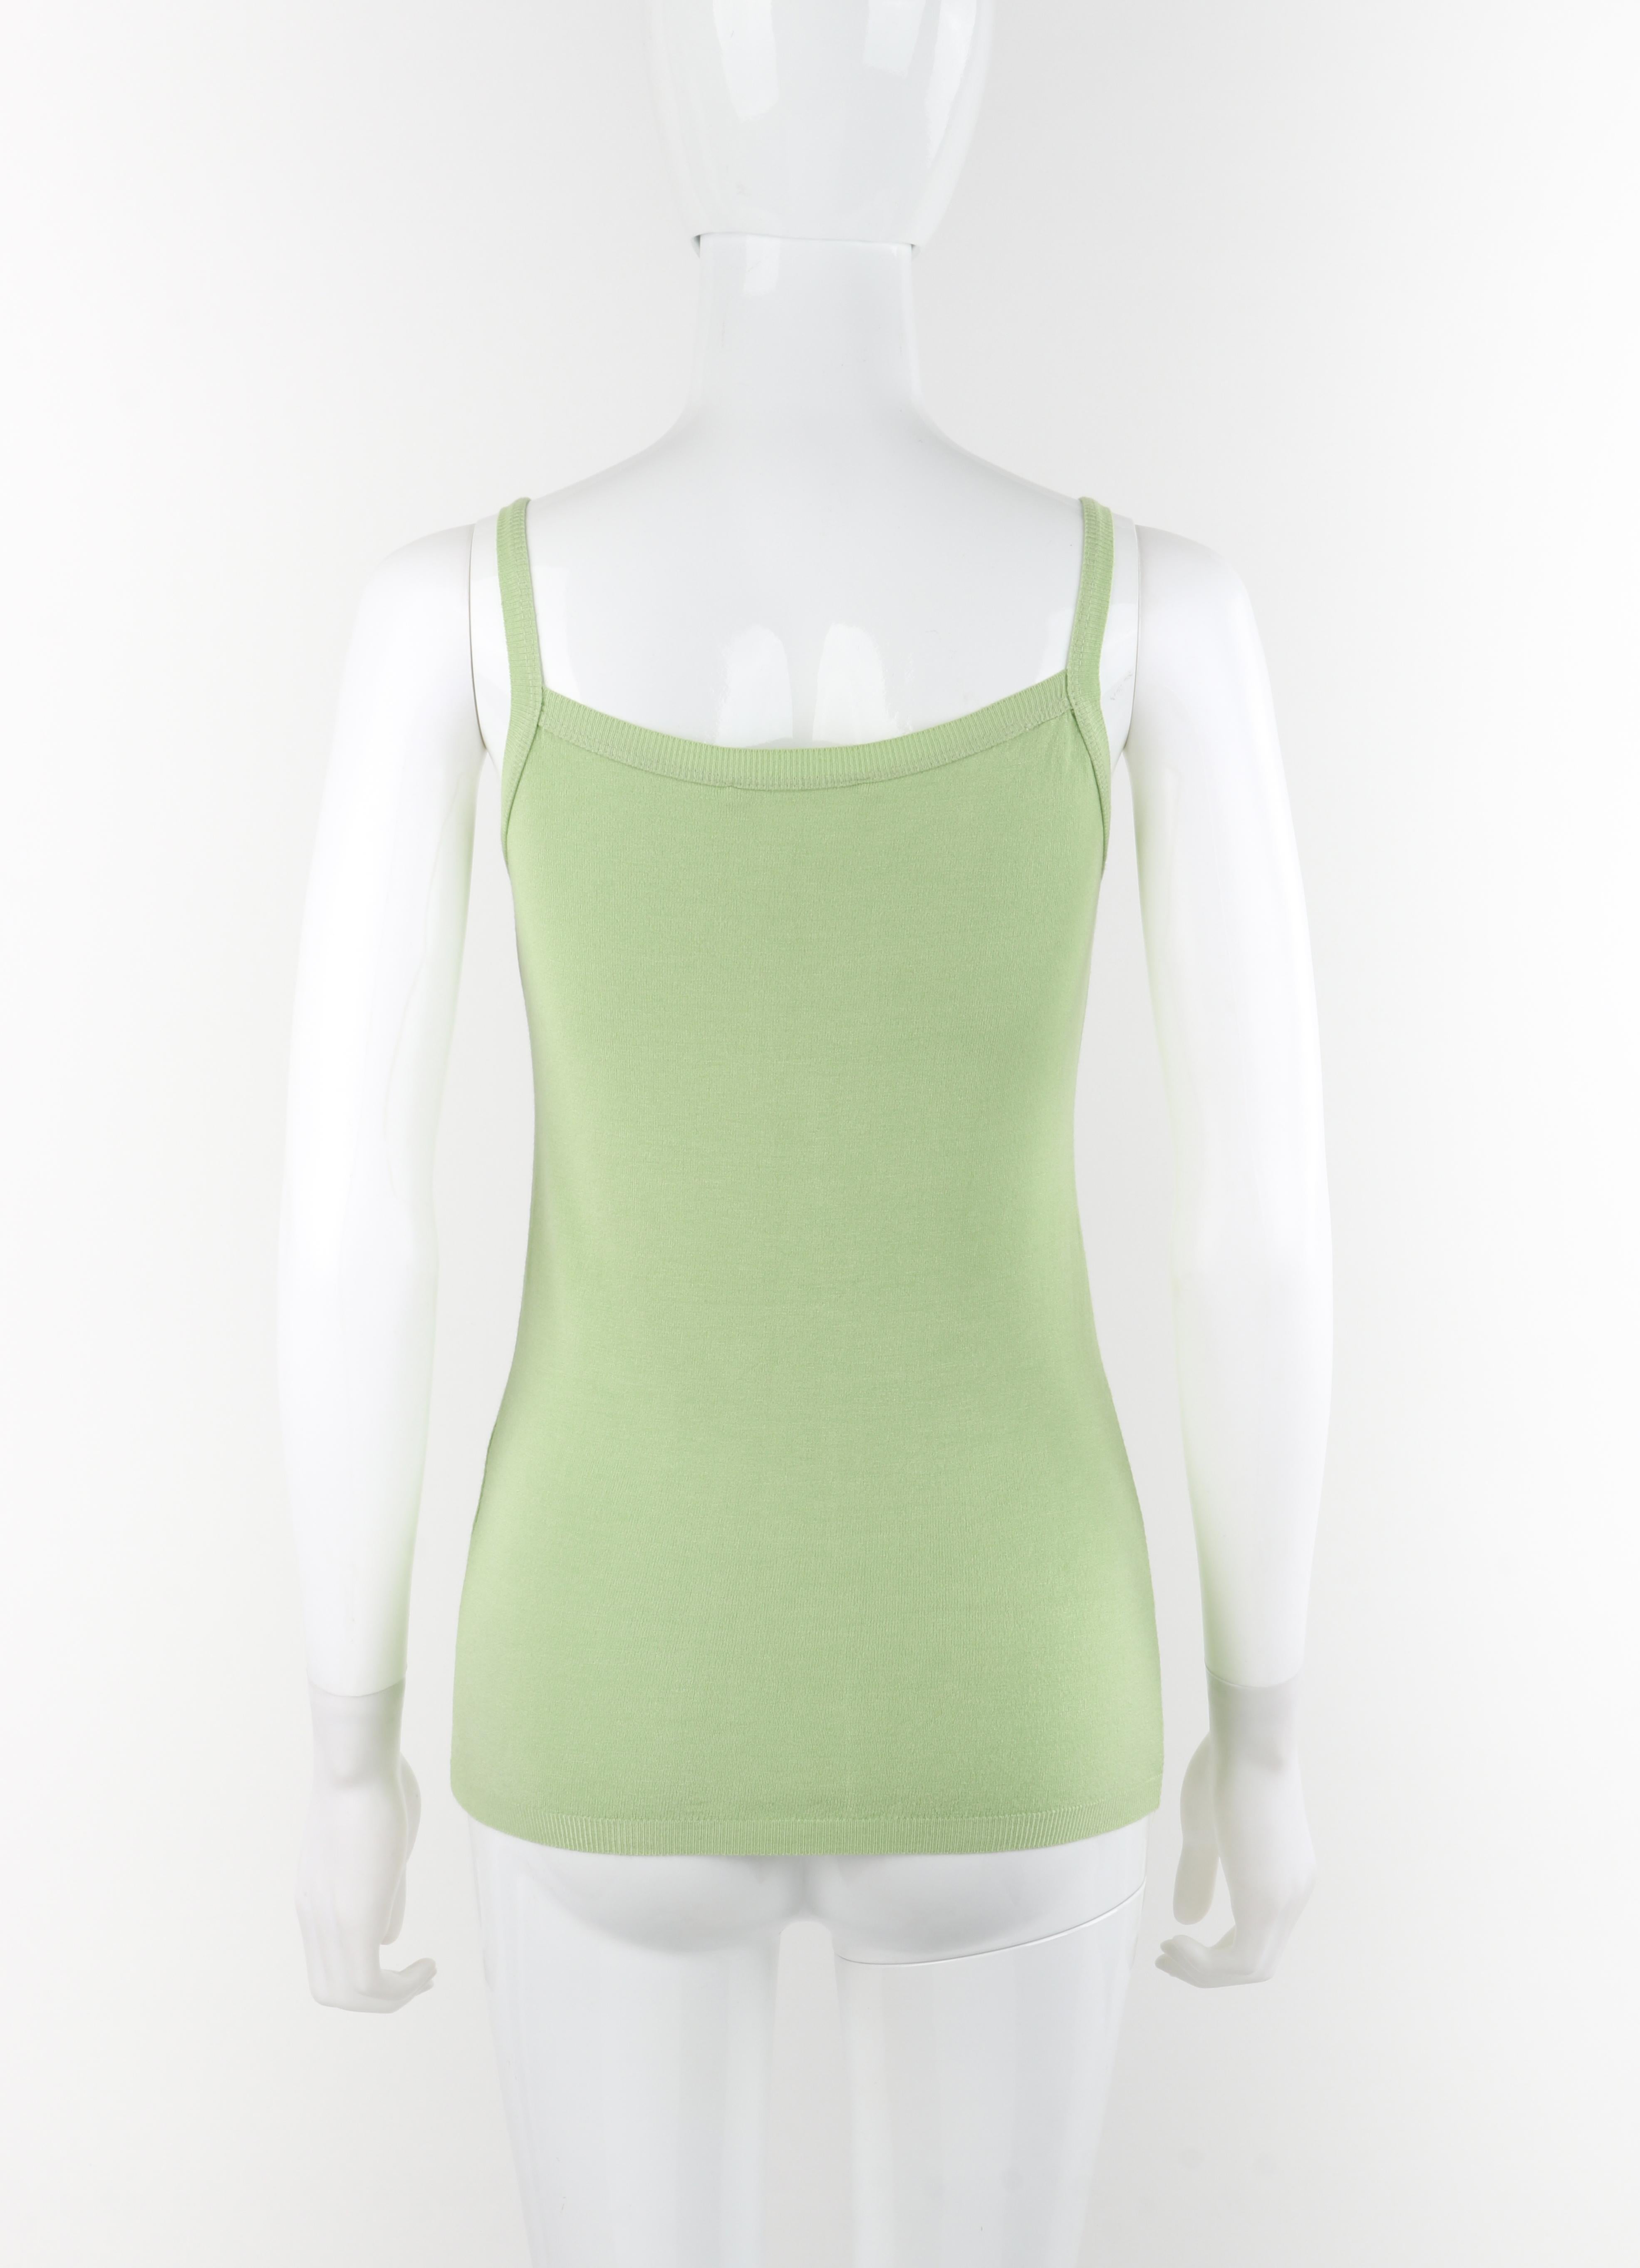 ALEXANDER McQUEEN c.1990s Green Stretch Knit Sequin Ruffle Tank Top For Sale 1